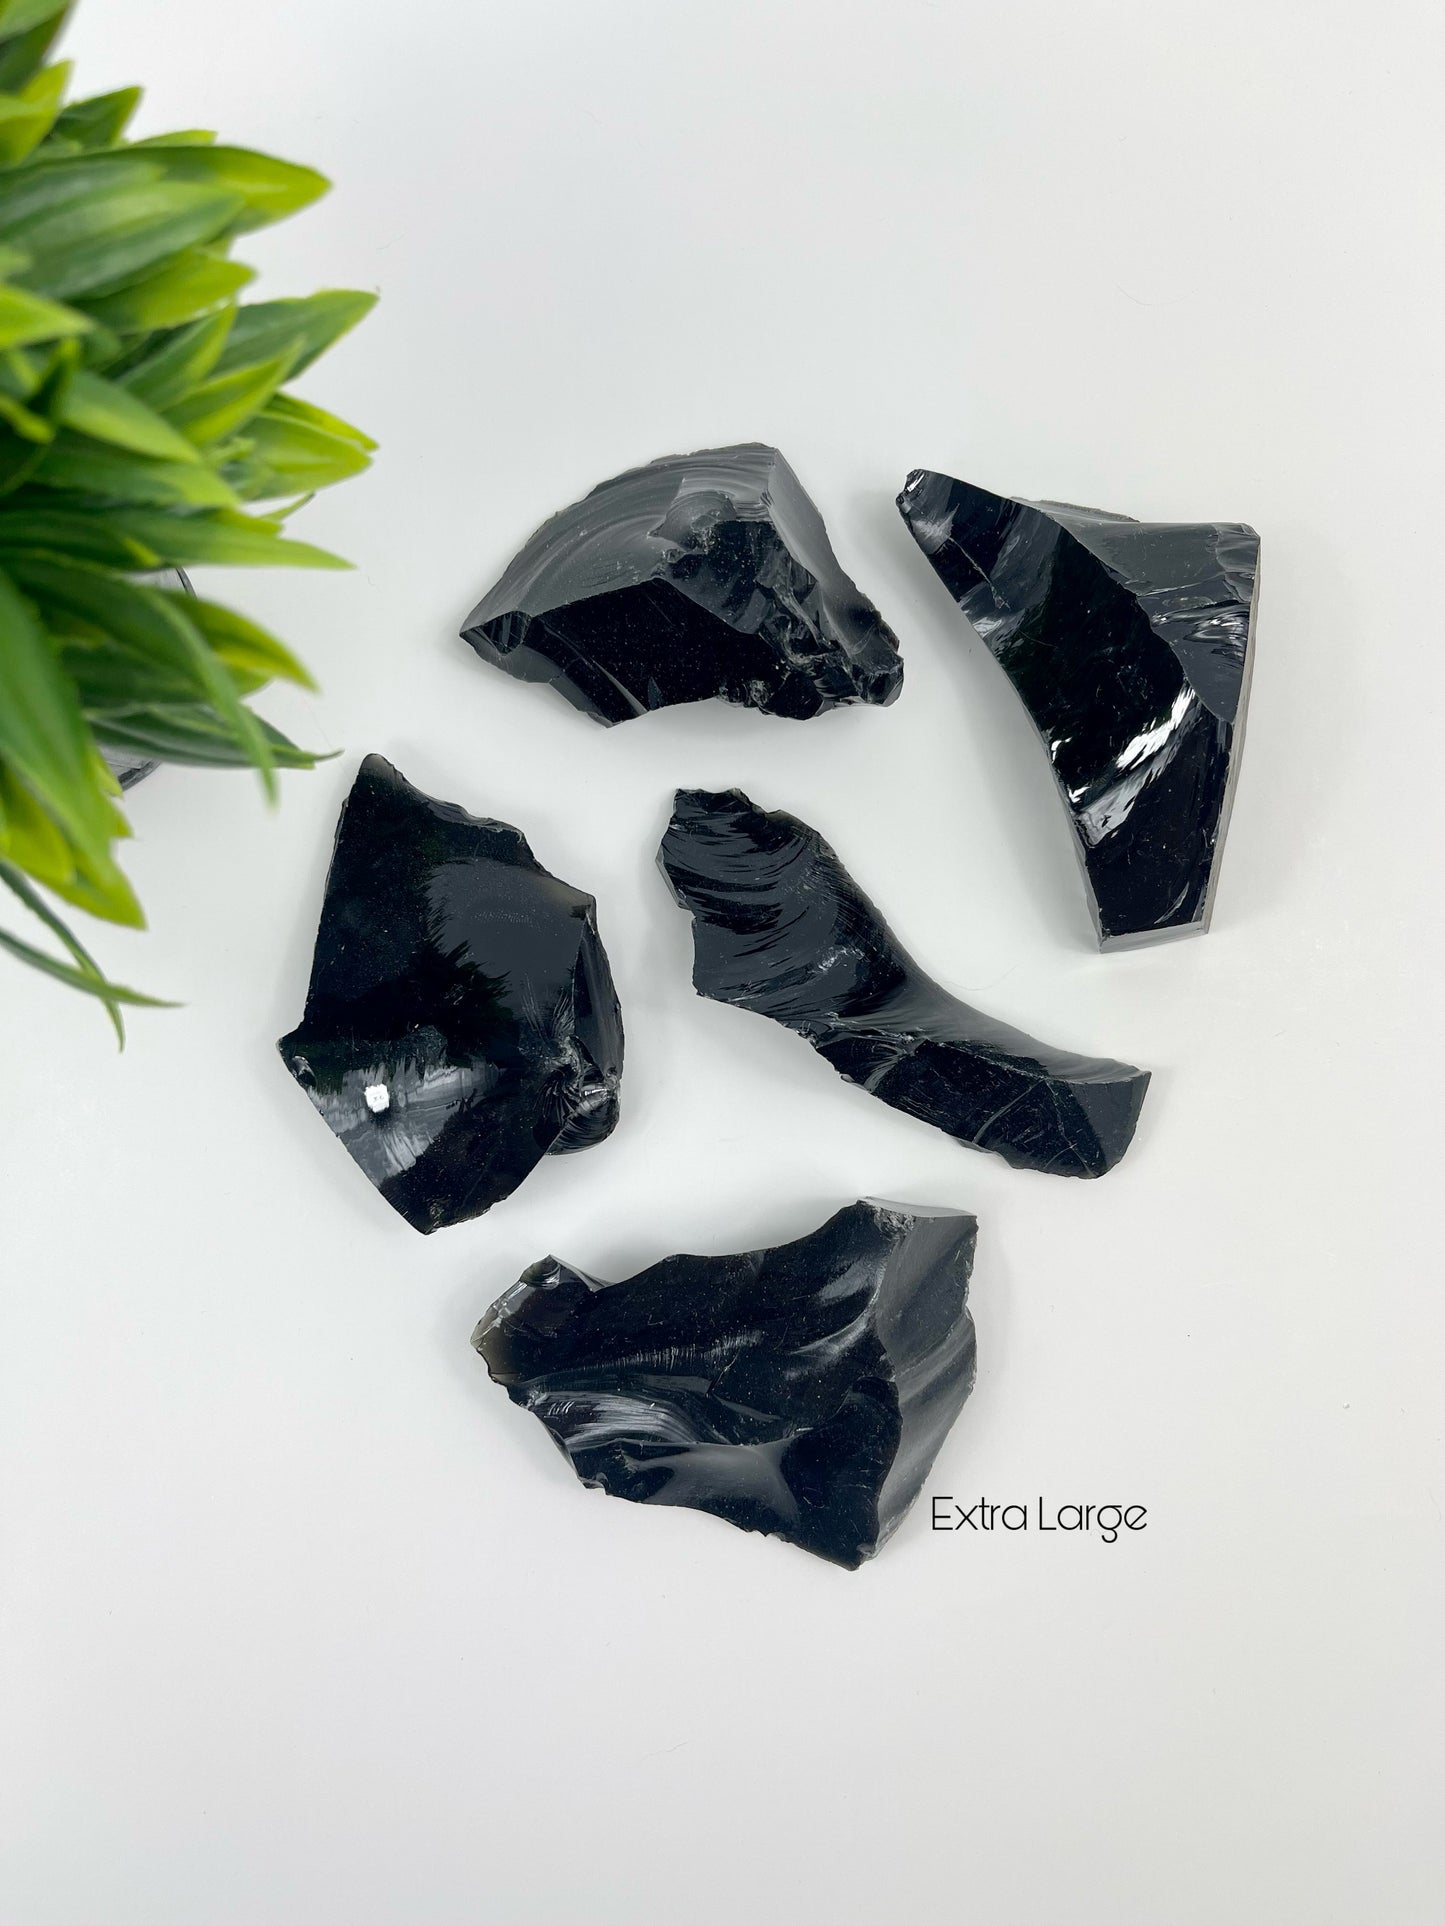 Extra Large Black Obsidian Raw Pieces